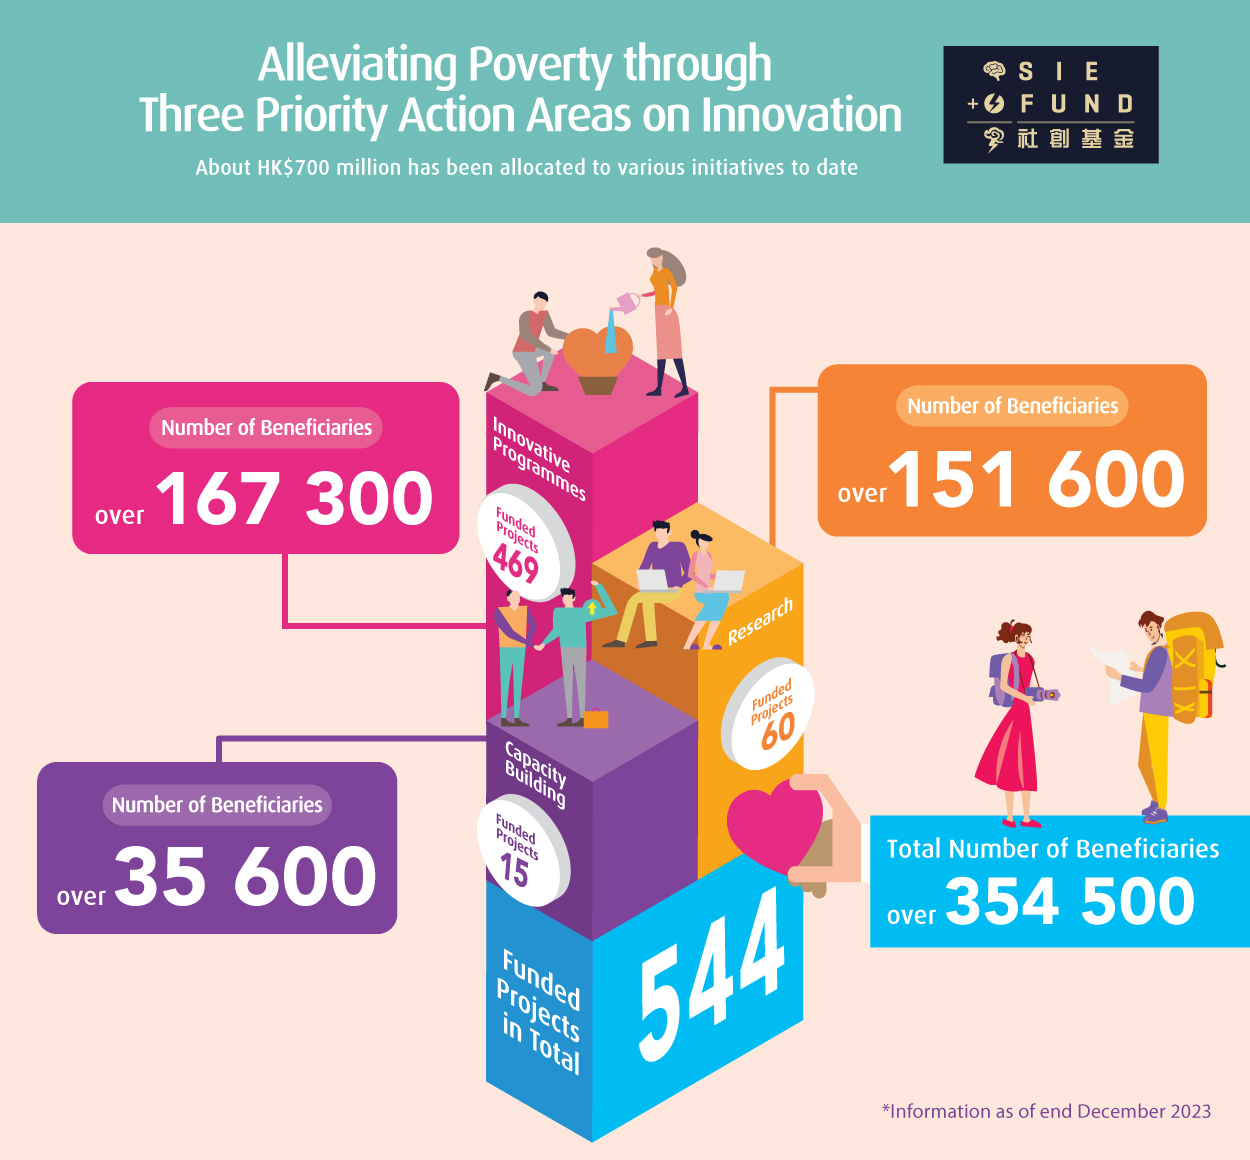 The SIE Fund seeks to alleviate poverty through three priority action areas on innovation.  About HK$700 million has been allocated to various initiatives as of December 2023.  The number of funded projects in total is 544 and the total number of beneficiaries is over 354500.  Under Innovative Programmes, the number of funded projects is 469 and the number of beneficiaries is over 167300.  Under Capacity Building, the number of funded projects is 15 and the number of beneficiaries is over 35600.  Under Research, the number of funded projects is 60 and the number of beneficiaries is over 151600.